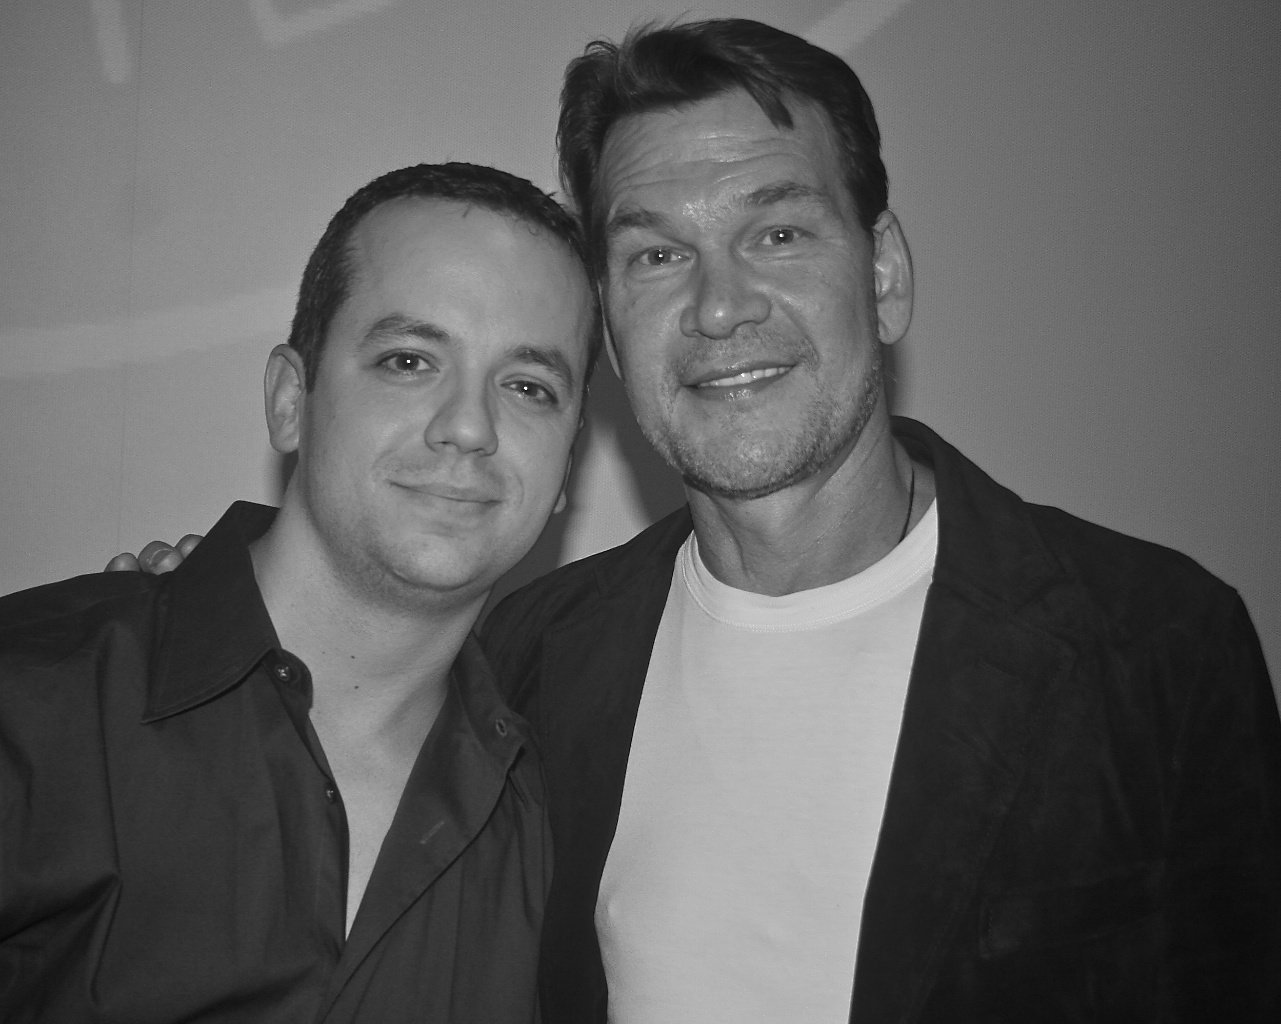 Todd Jenkins and Patrick Swayze at the premier of the film JUMP.